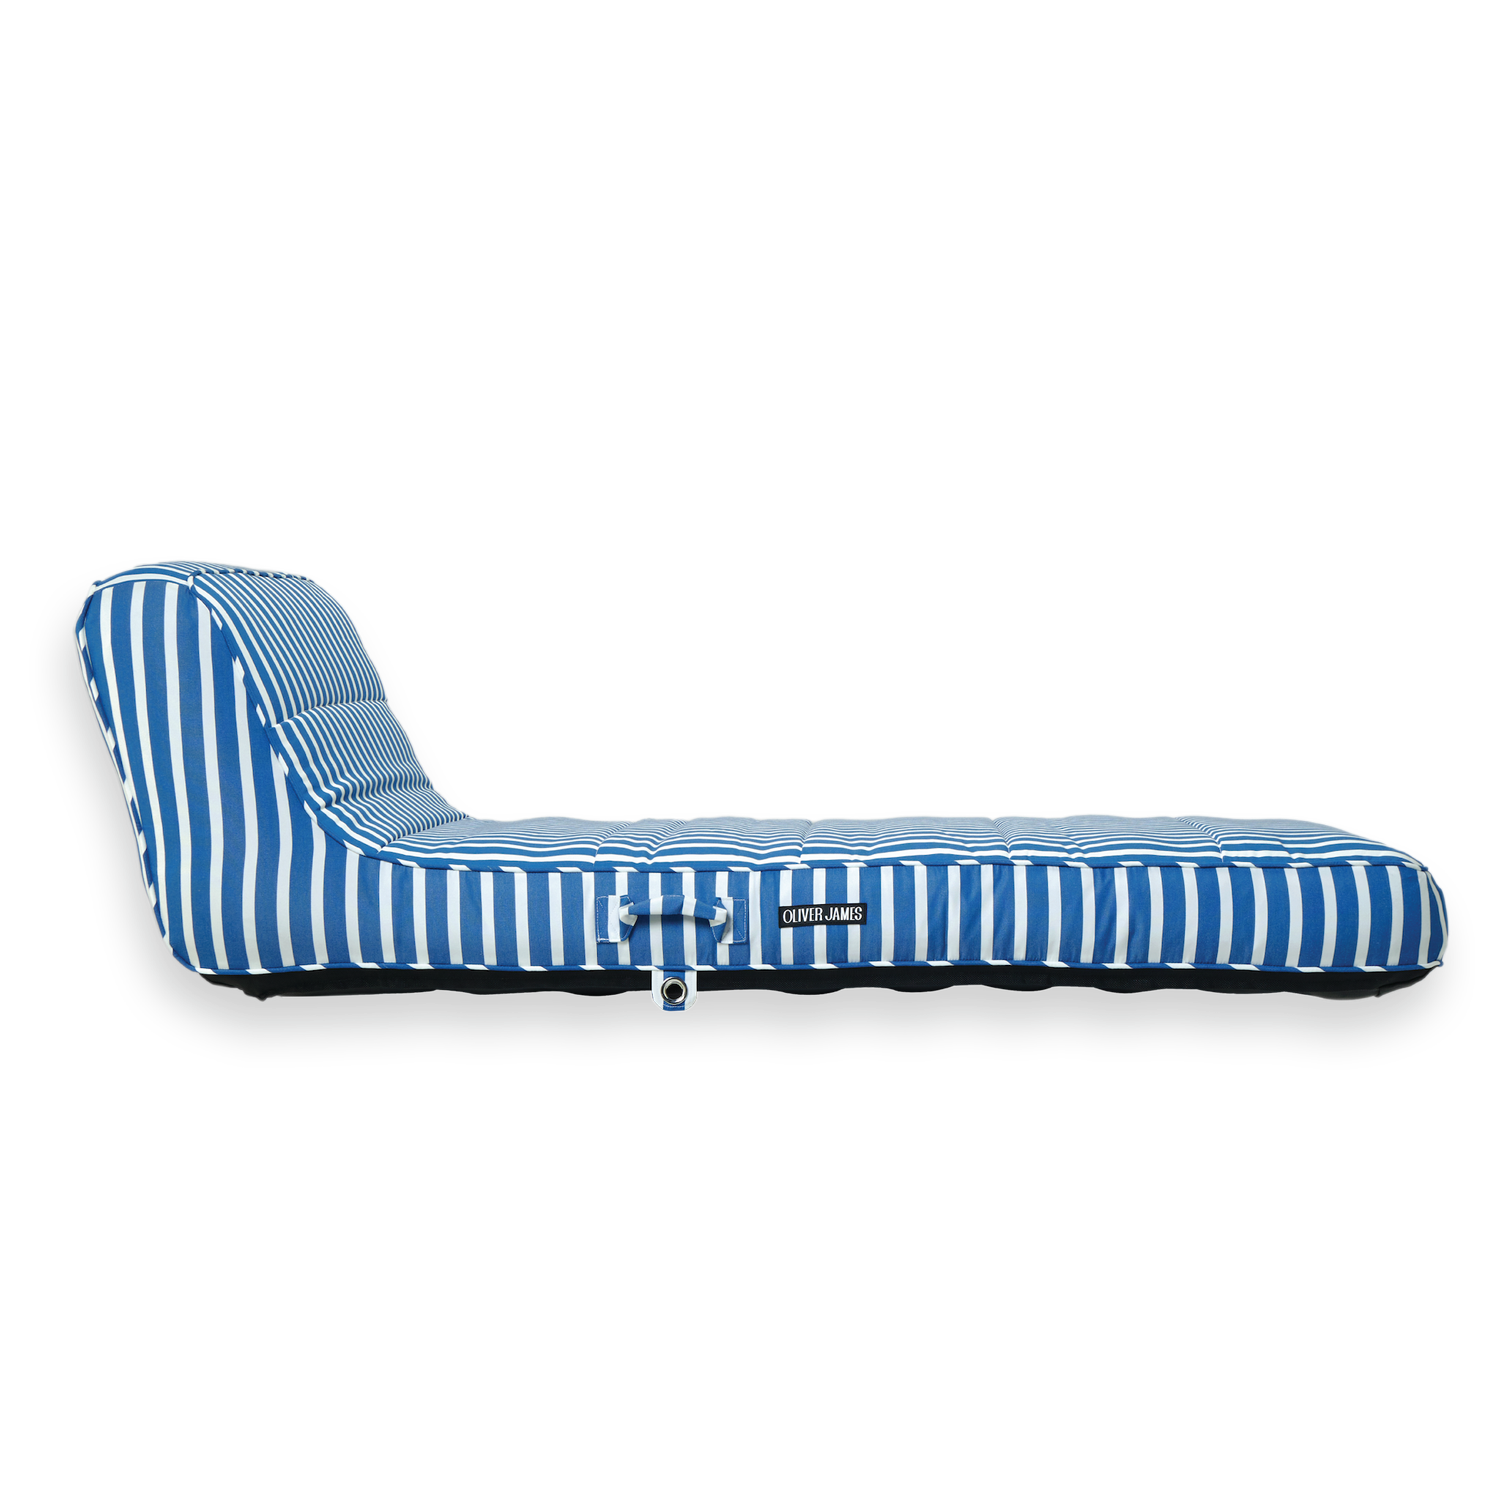 The side profile and backrest angle of a single blue and white stripe luxury pool float.